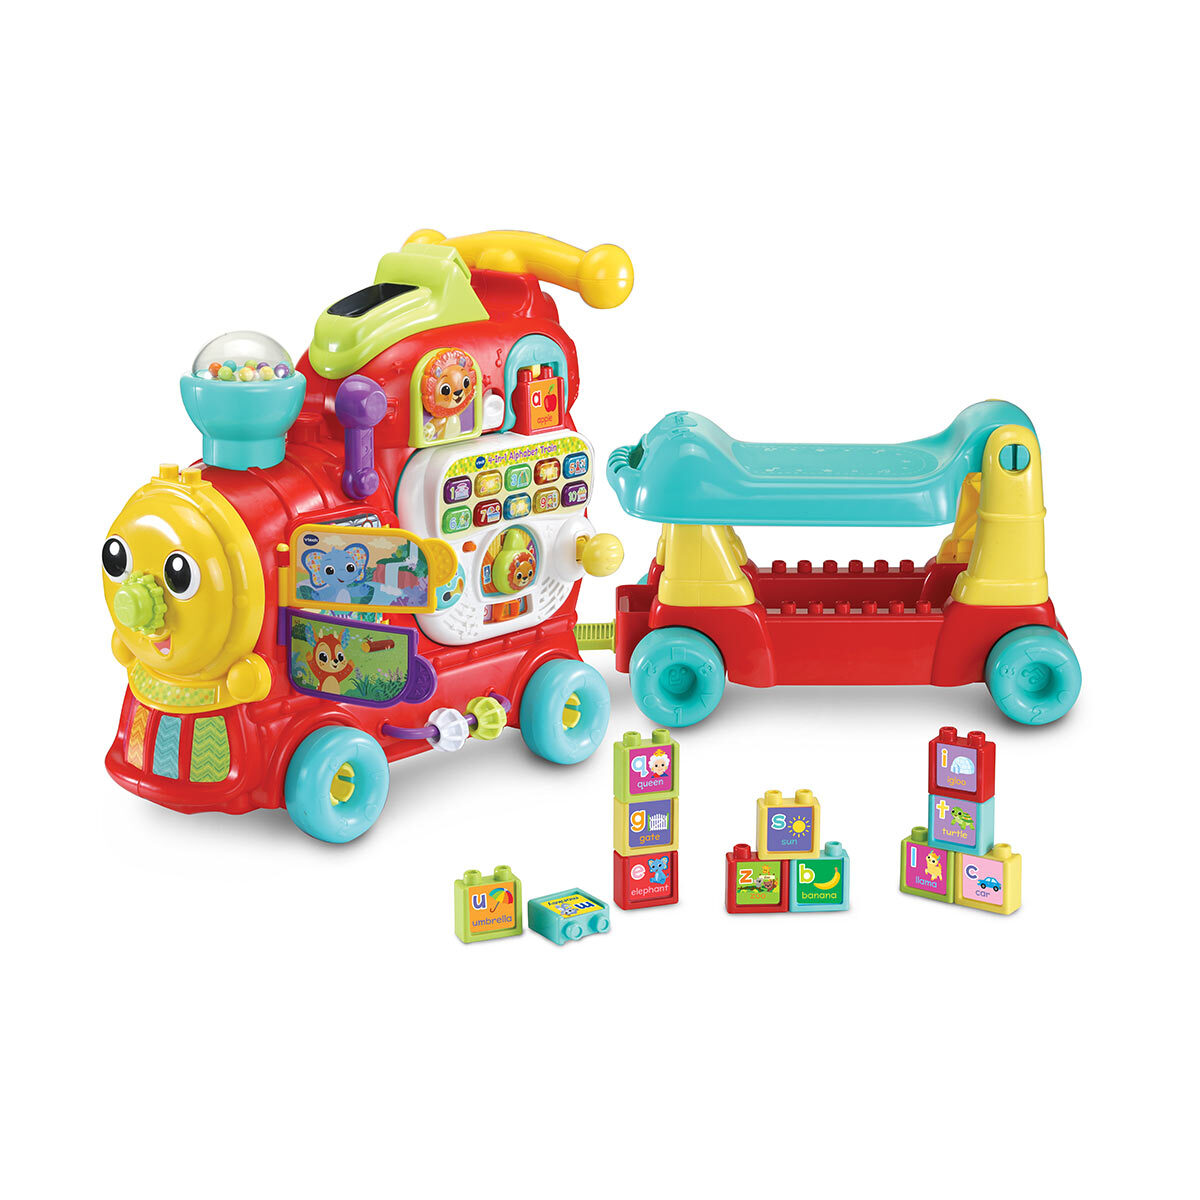 Buy VTech 4-in-1 Alphabet Train Set Product Image at Costco.co.uk